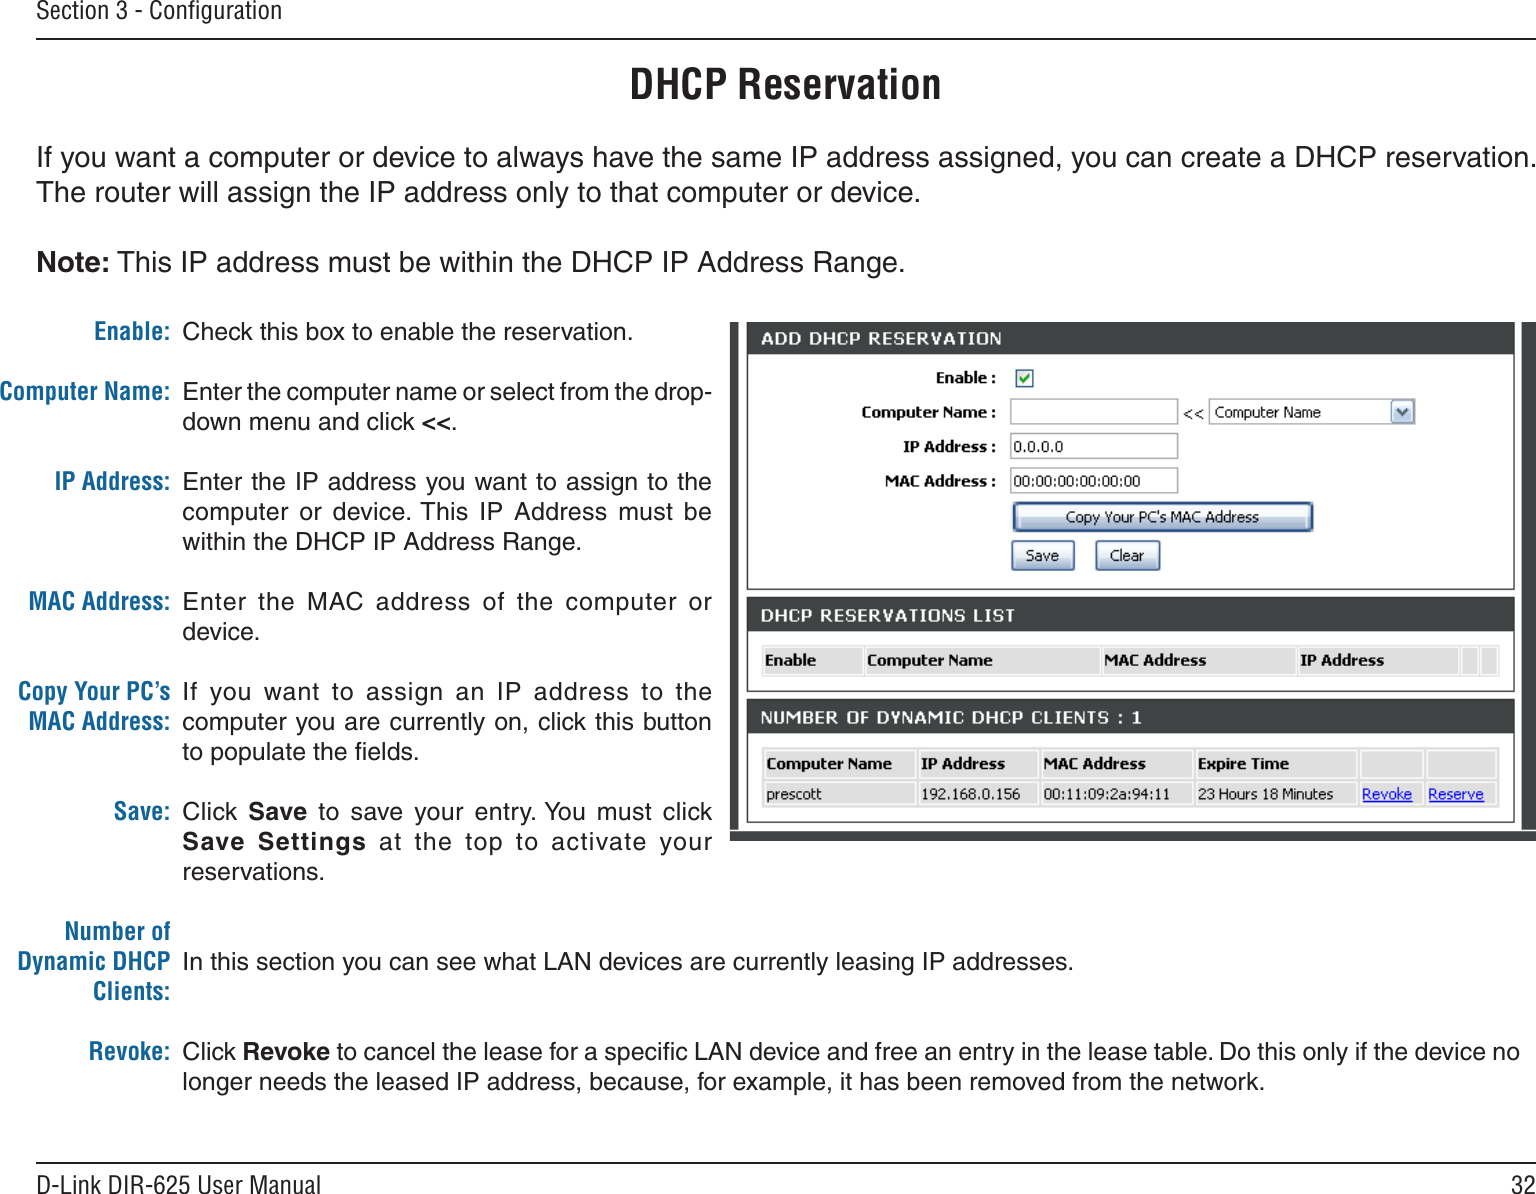 32D-Link DIR-625 User ManualSection 3 - ConﬁgurationDHCP ReservationIf you want a computer or device to always have the same IP address assigned, you can create a DHCP reservation. The router will assign the IP address only to that computer or device. Note: This IP address must be within the DHCP IP Address Range.Check this box to enable the reservation.Enter the computer name or select from the drop-down menu and click &lt;&lt;.Enter the IP address you want to assign to the computer  or  device. This  IP  Address  must  be within the DHCP IP Address Range.Enter  the  MAC address  of  the  computer  or device.If  you  want  to  assign  an  IP  address  to  the computer you are currently on, click this button to populate the ﬁelds. Click  Save  to  save  your  entry. You  must  click Save  Settings  at  the  top  to  activate  your reservations. In this section you can see what LAN devices are currently leasing IP addresses.Click Revoke to cancel the lease for a speciﬁc LAN device and free an entry in the lease table. Do this only if the device no longer needs the leased IP address, because, for example, it has been removed from the network.Enable:Computer Name:IP Address:MAC Address:Copy Your PC’s MAC Address:Save:Number of Dynamic DHCP Clients:Revoke: